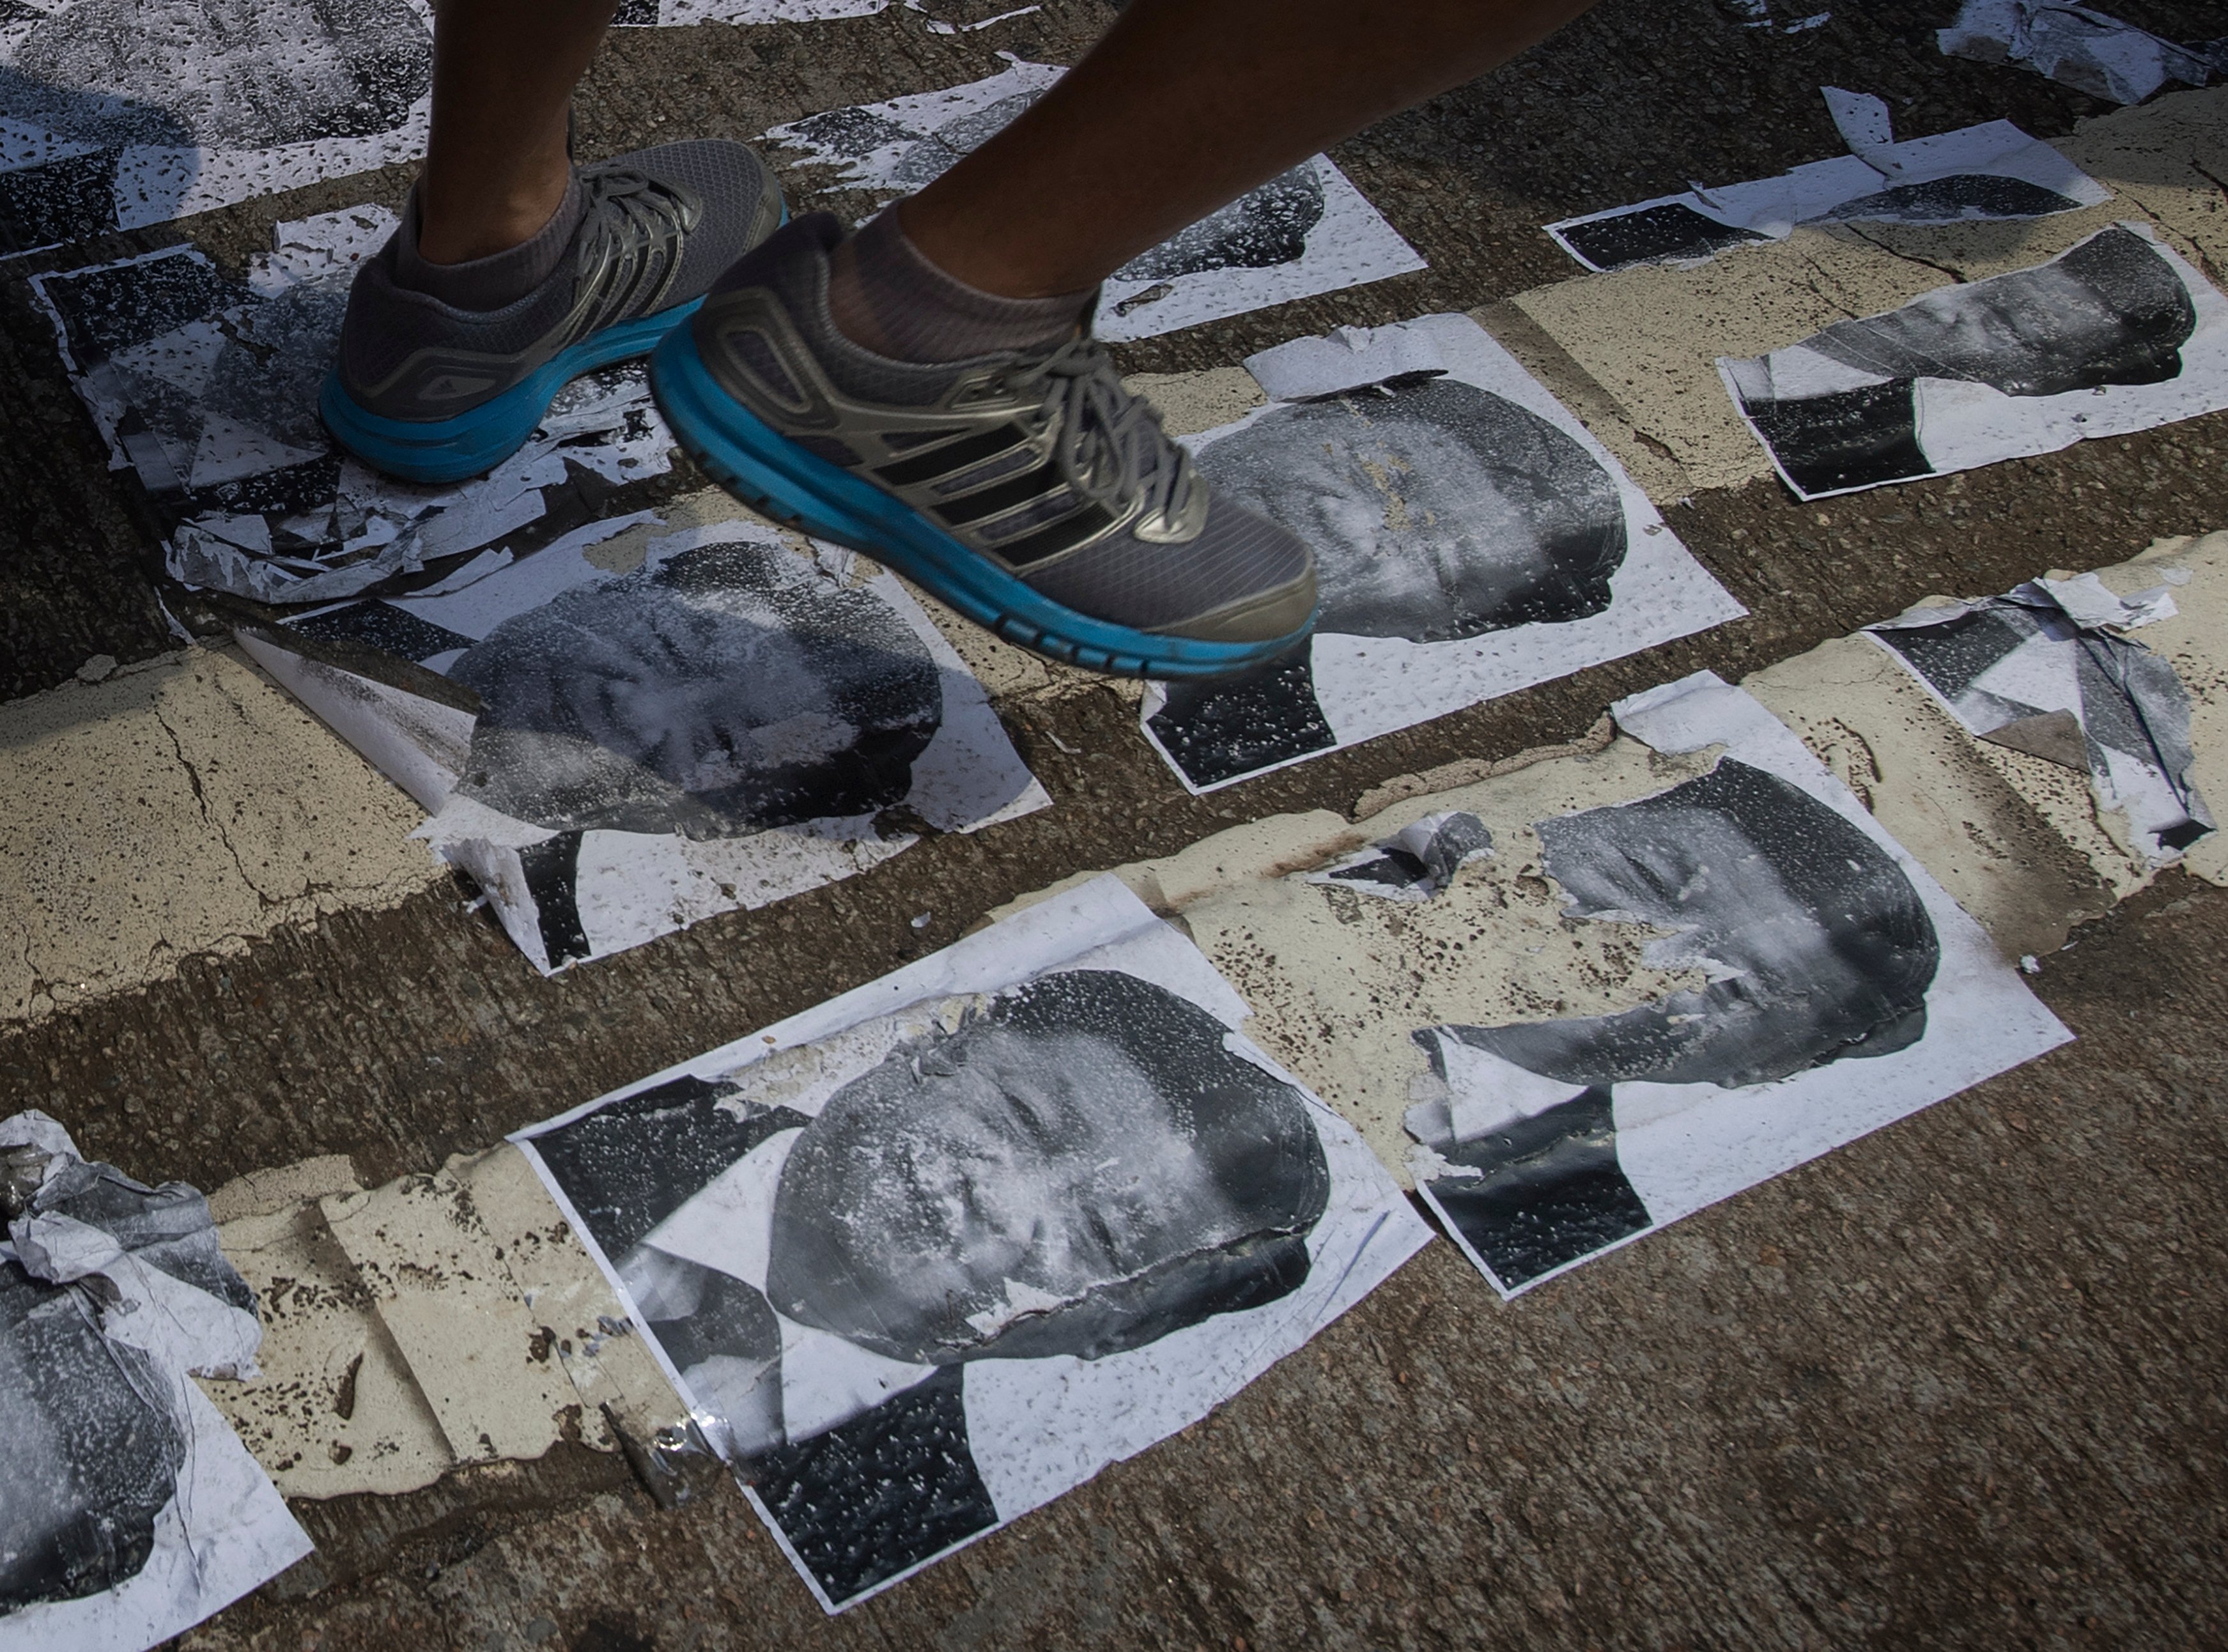 Protesters walk on an image of Chinese President Xi Jinping in the Causeway Bay area in Hong Kong on October 1, 2019, as the city observes the National Day holiday to mark the 70th anniversary of communist China's founding. - Strife-torn Hong Kong on October 1 marked the 70th anniversary of communist China's founding with defiant "Day of Grief" protests and fresh clashes with police as pro-democracy activists ignored a ban and took to the streets across the city. (Photo by Mark RALSTON / AFP) (Photo credit should read MARK RALSTON/AFP/Getty Images)